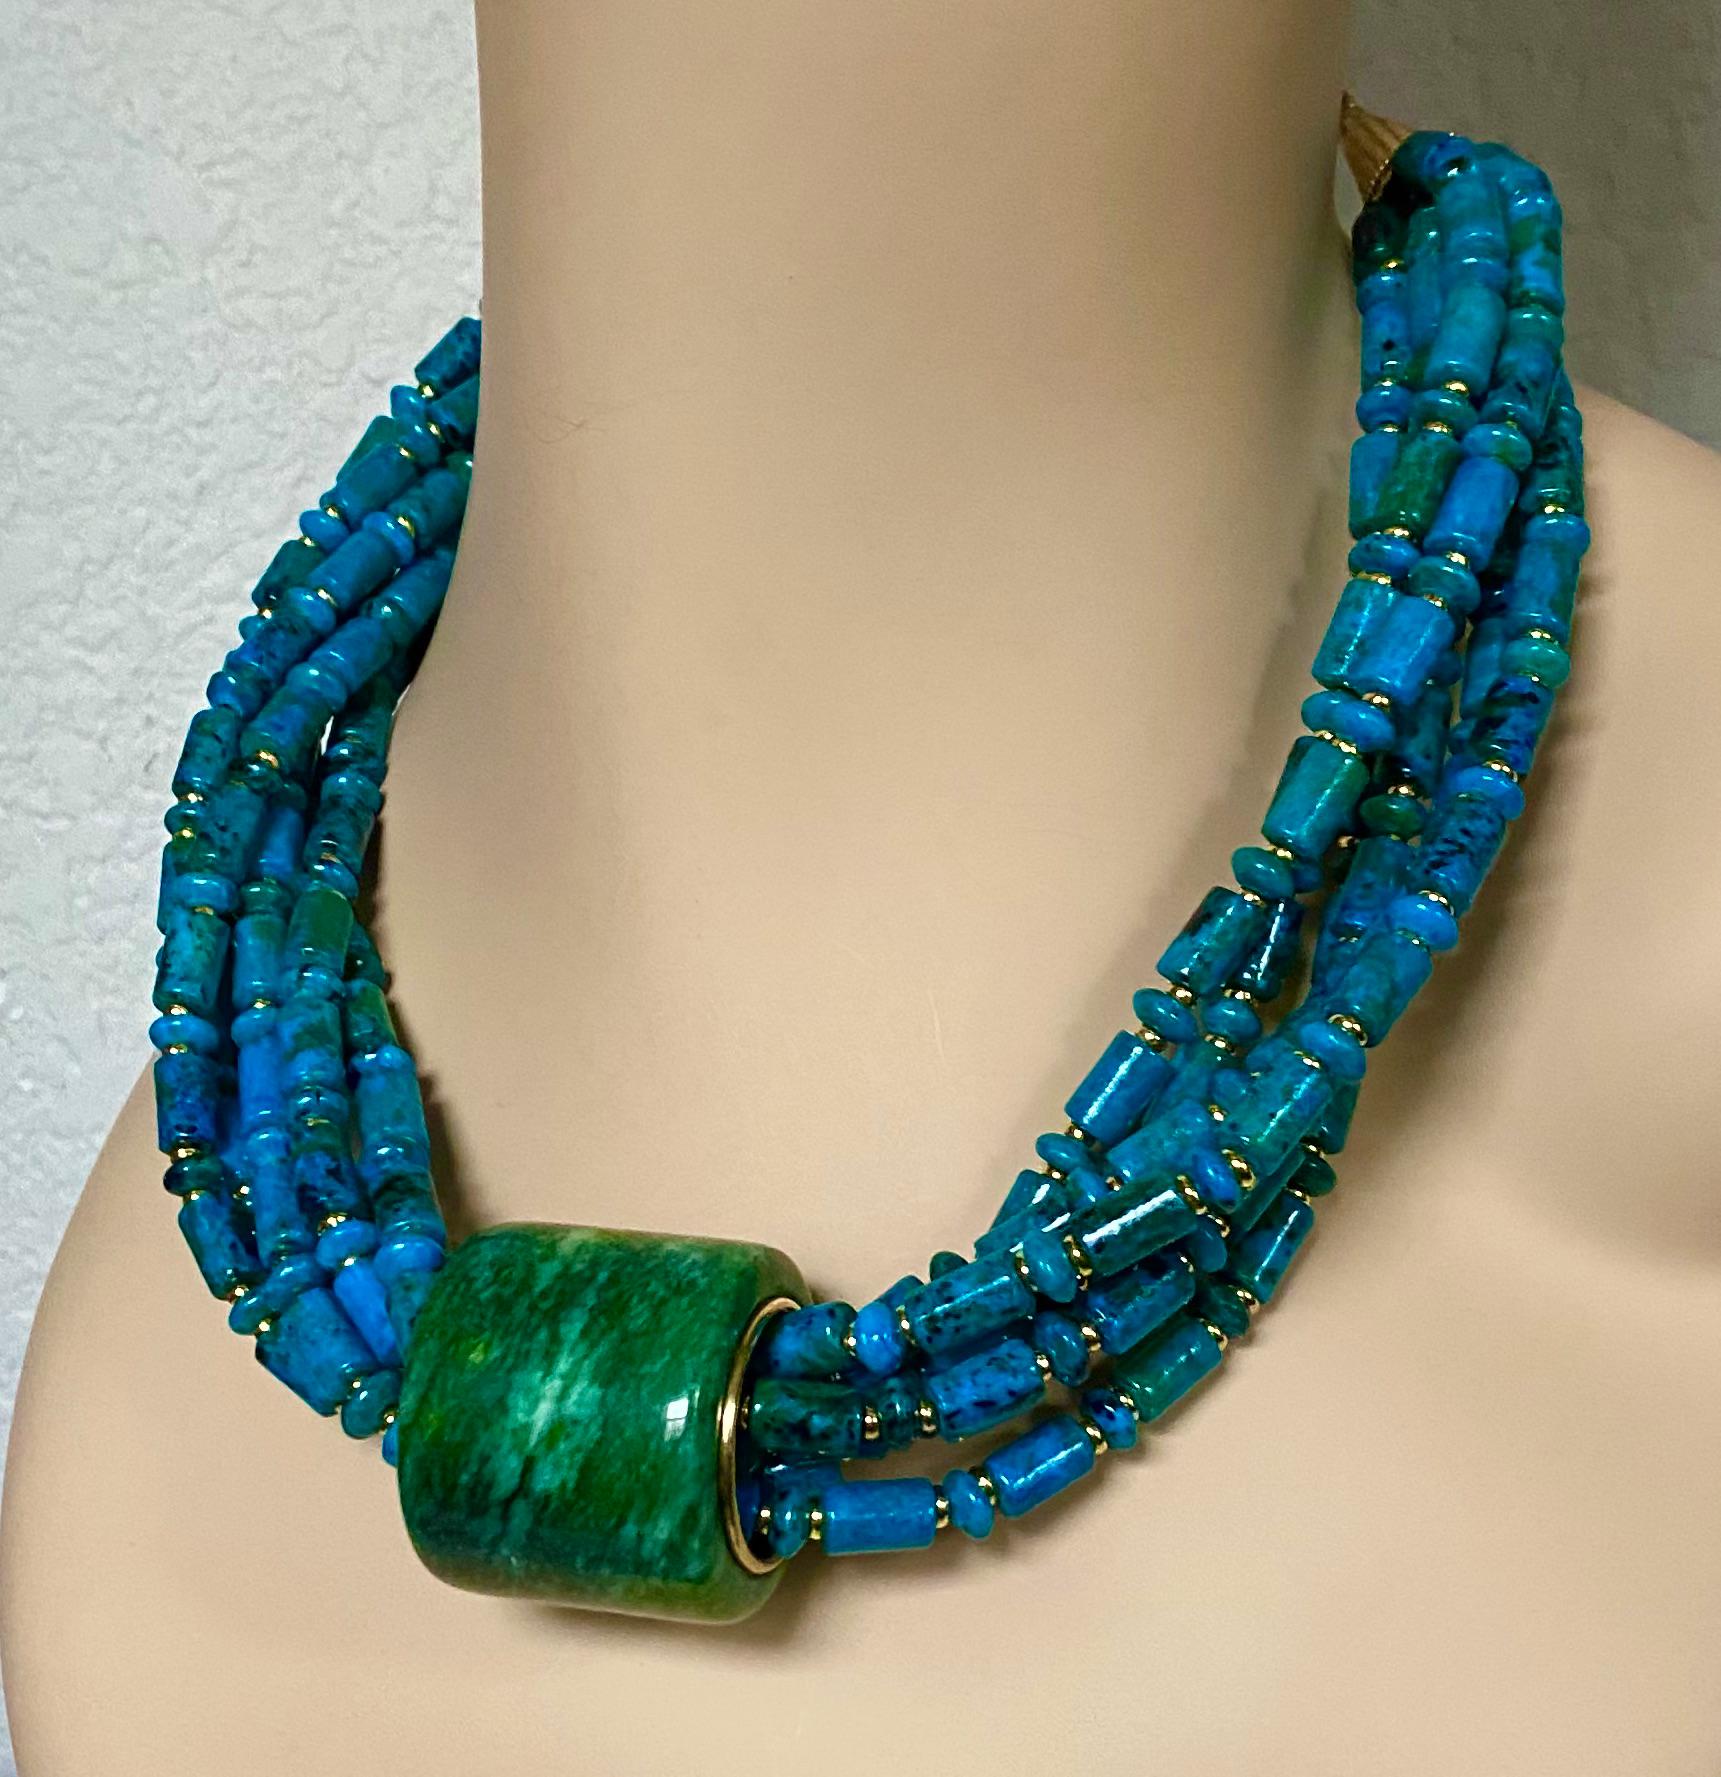 A jadeite archer's ring is the centerpiece of this dramatic torsade necklace.  Jadeite (origin: Myanmar) is the supreme member of the larger jade family.  It is valued for its range of colors, hardness and durability.  Jadeite polishes to a